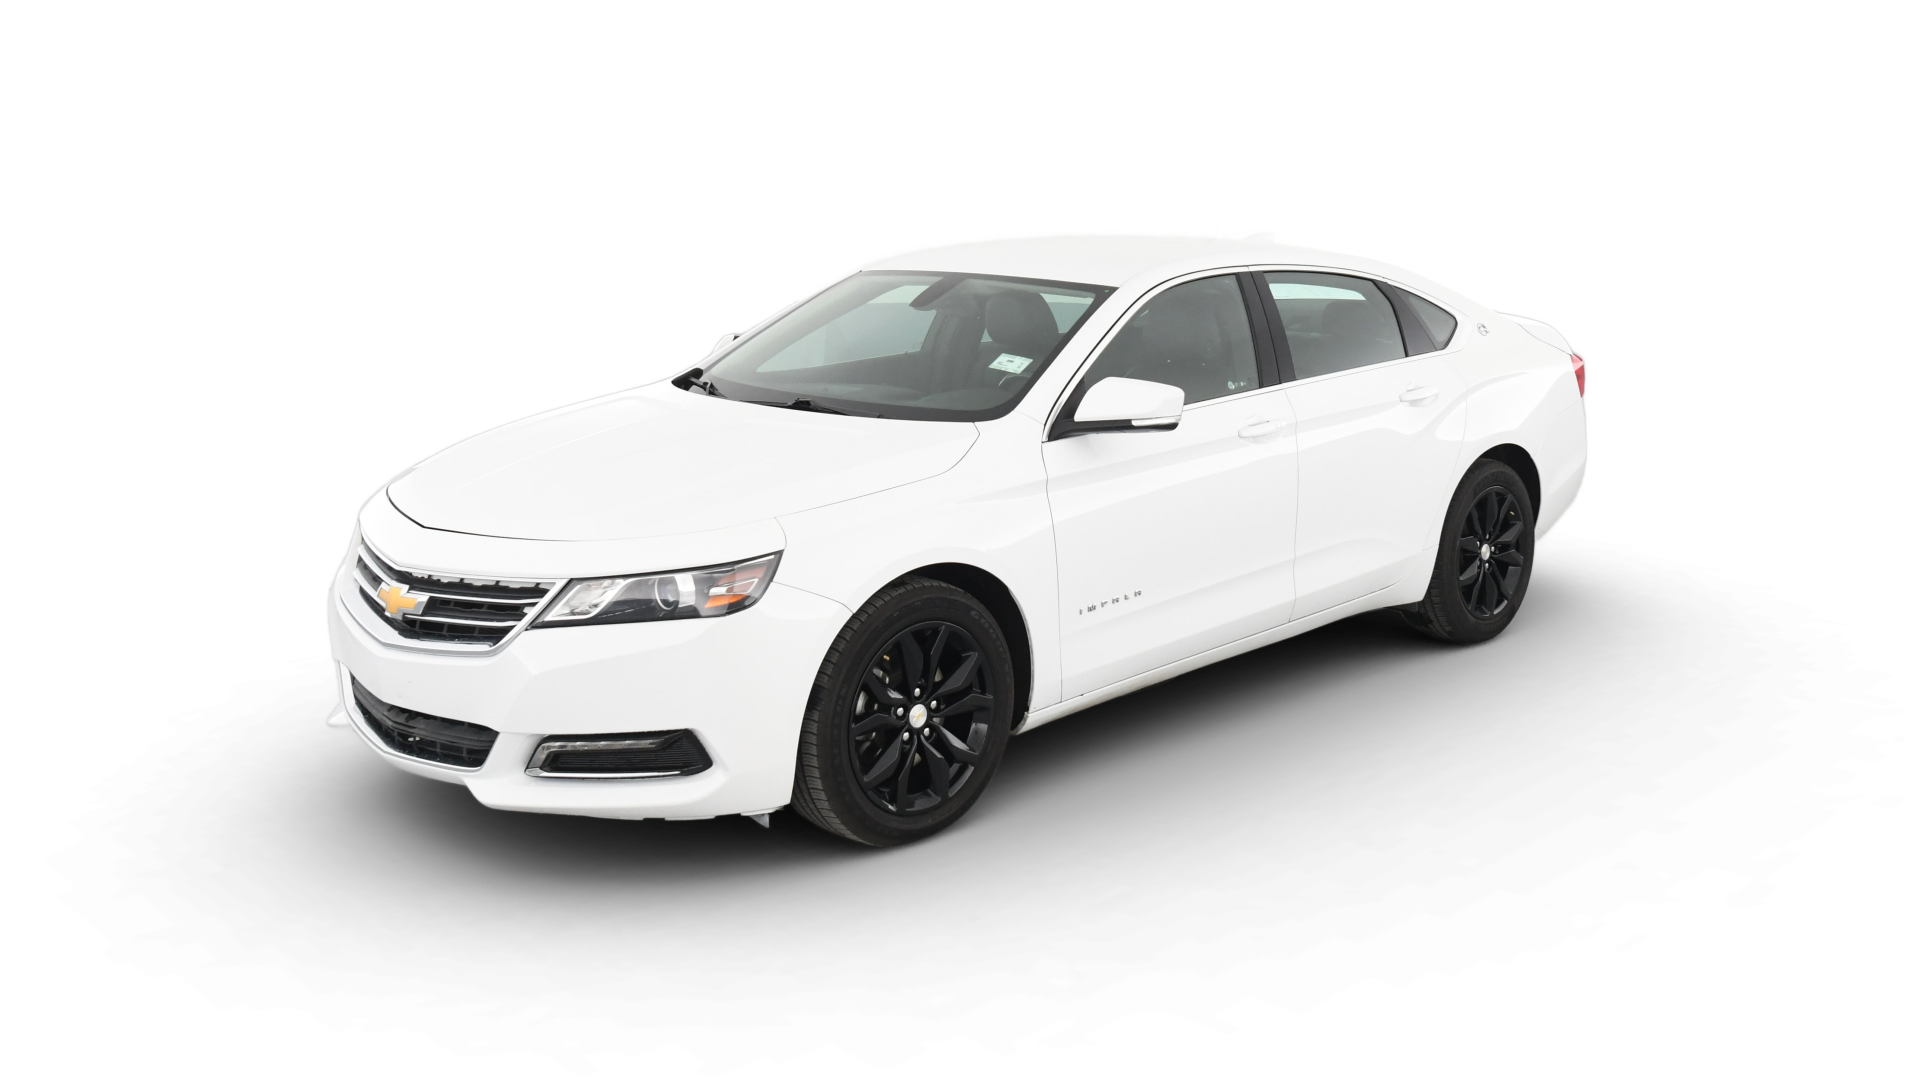 Used 2018 Chevrolet Impala For Sale Online | Carvana